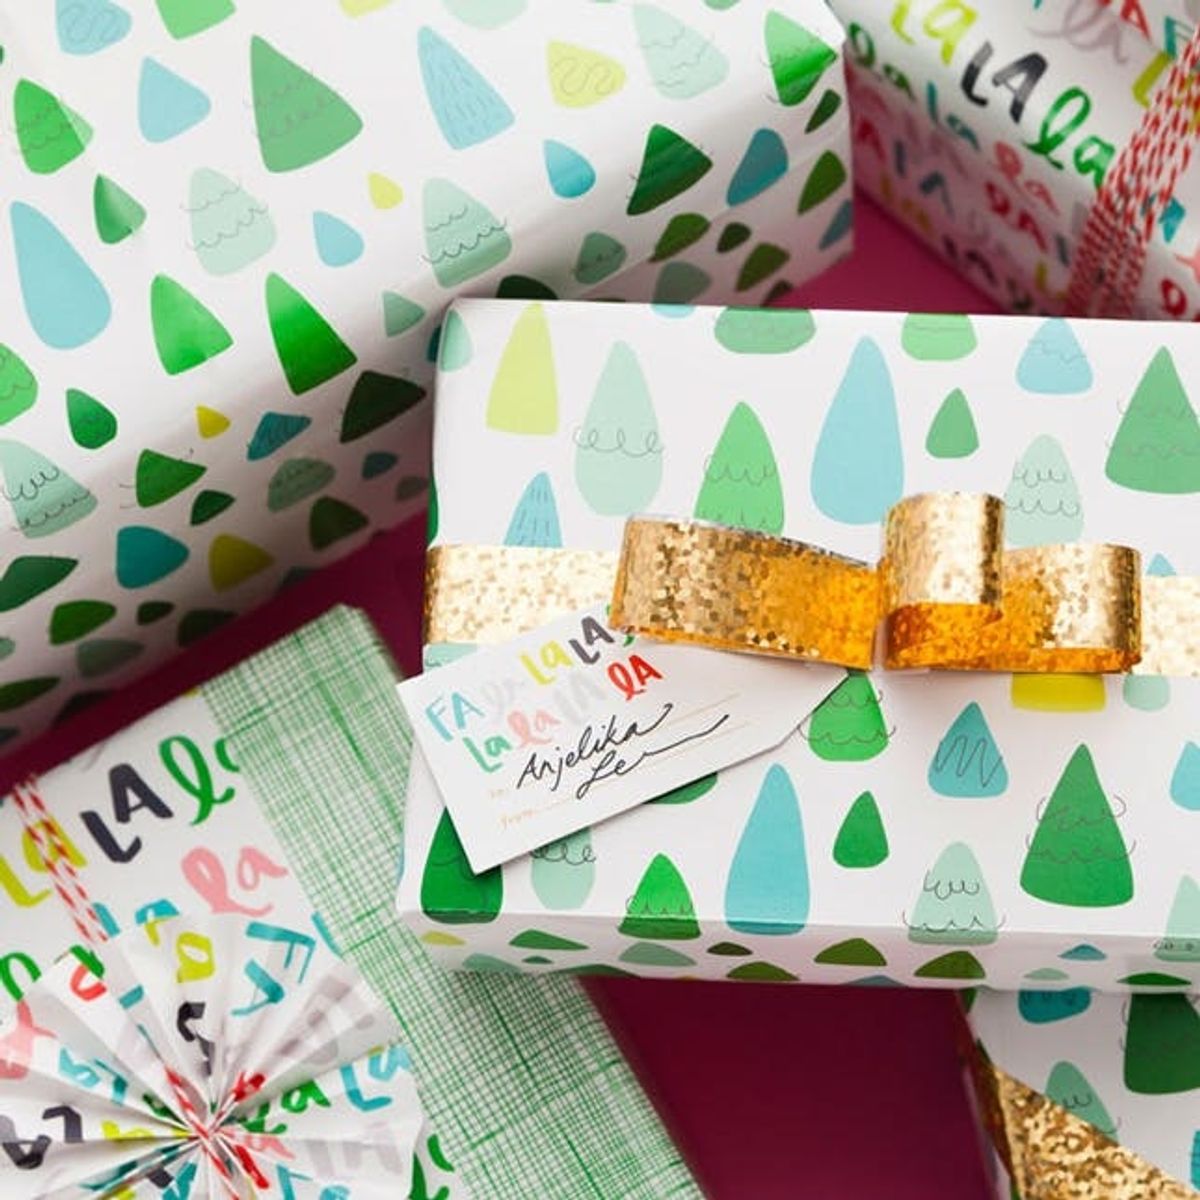 21 Creative Gift Wrap Ideas to Up Your Gifting Game